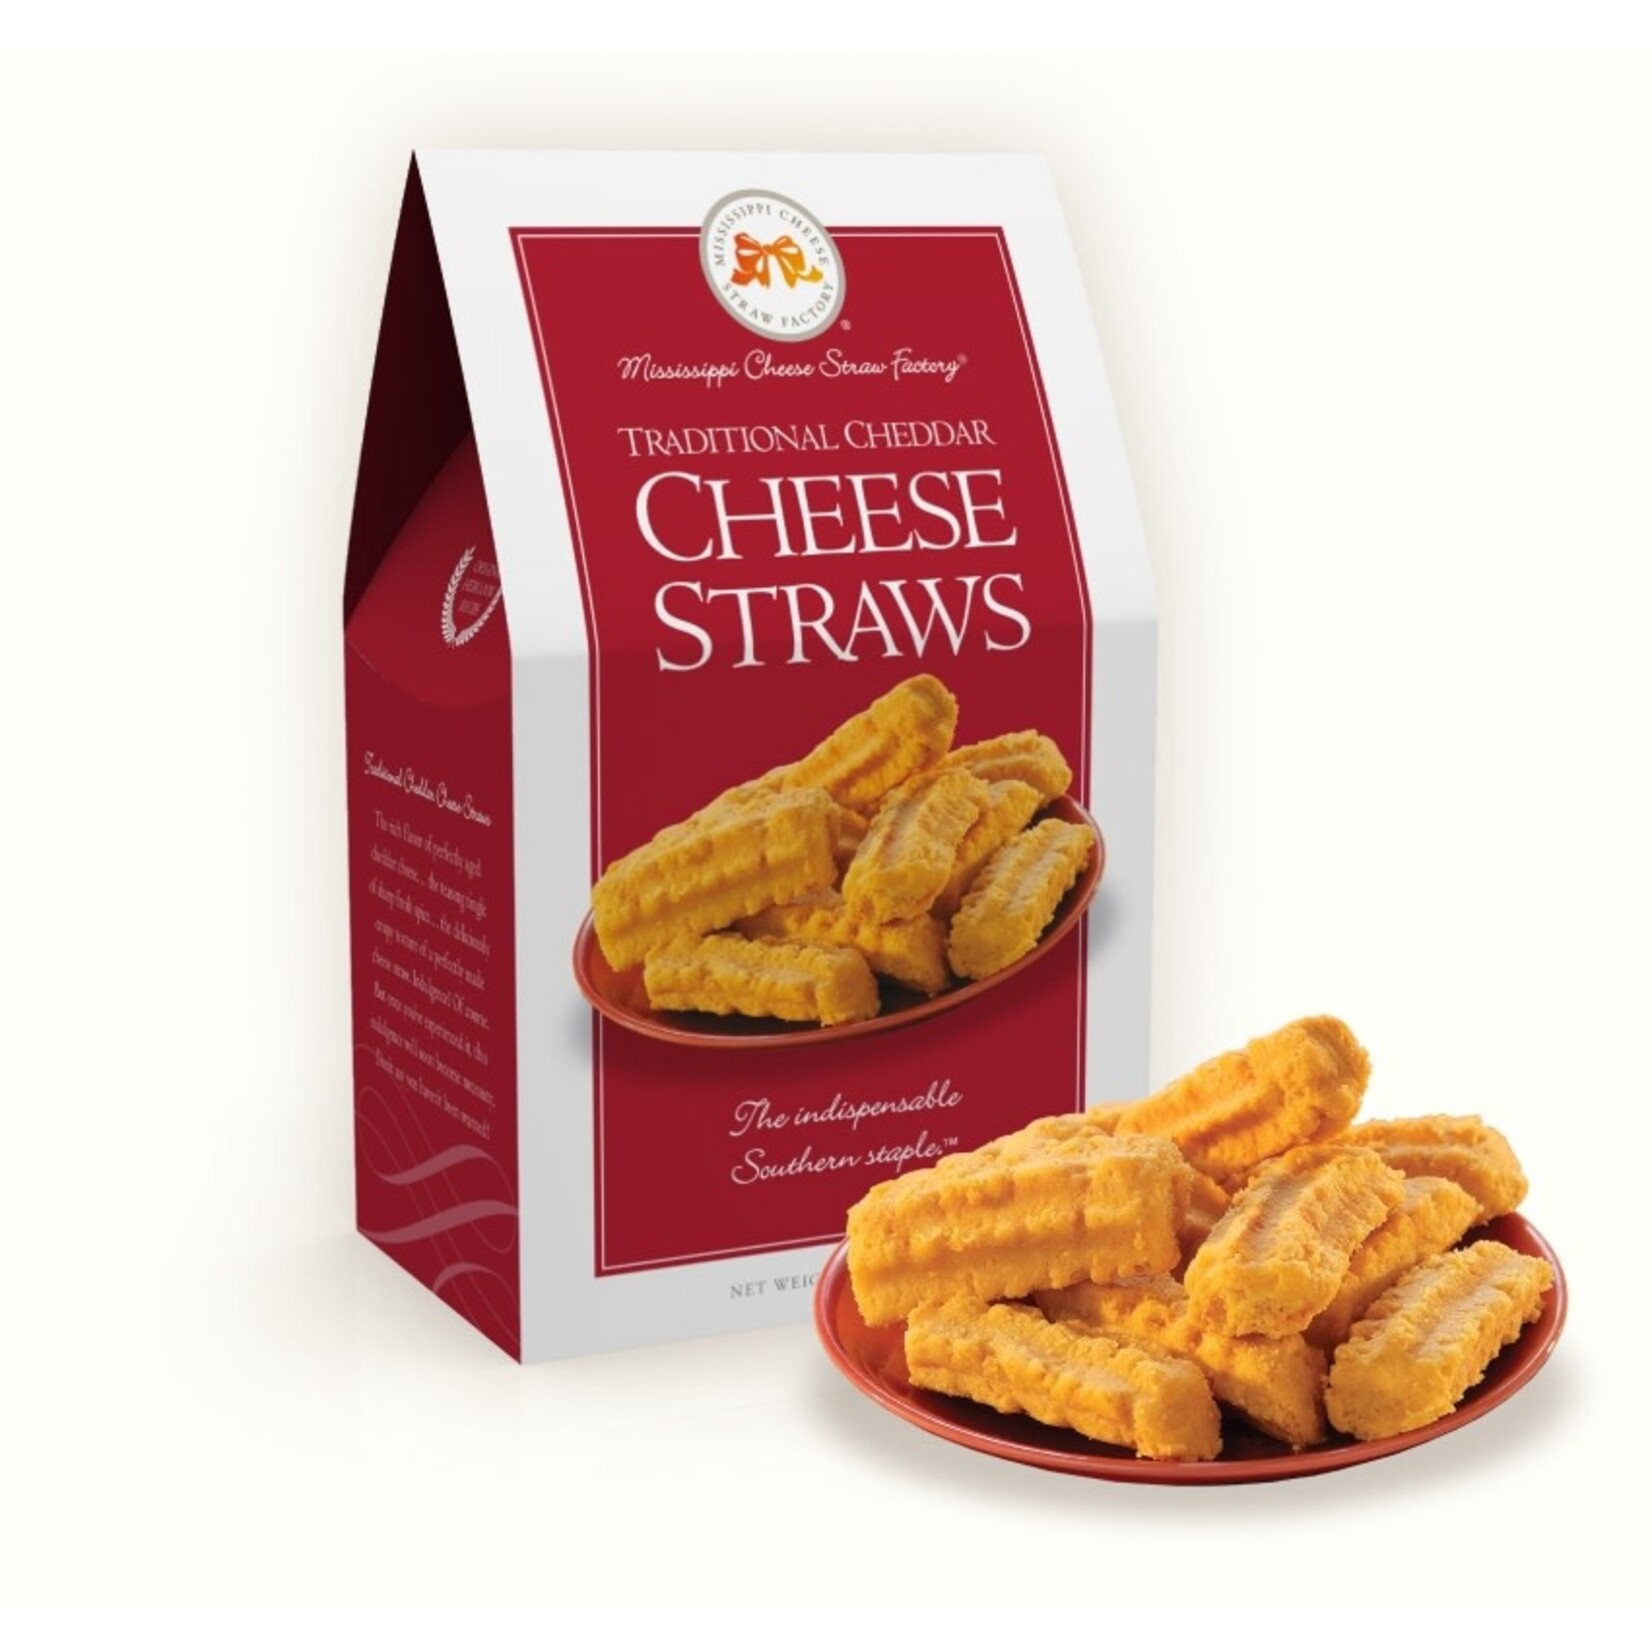 Mississippi Cheese Straw Factory Cheese Straws 6.5oz Carton